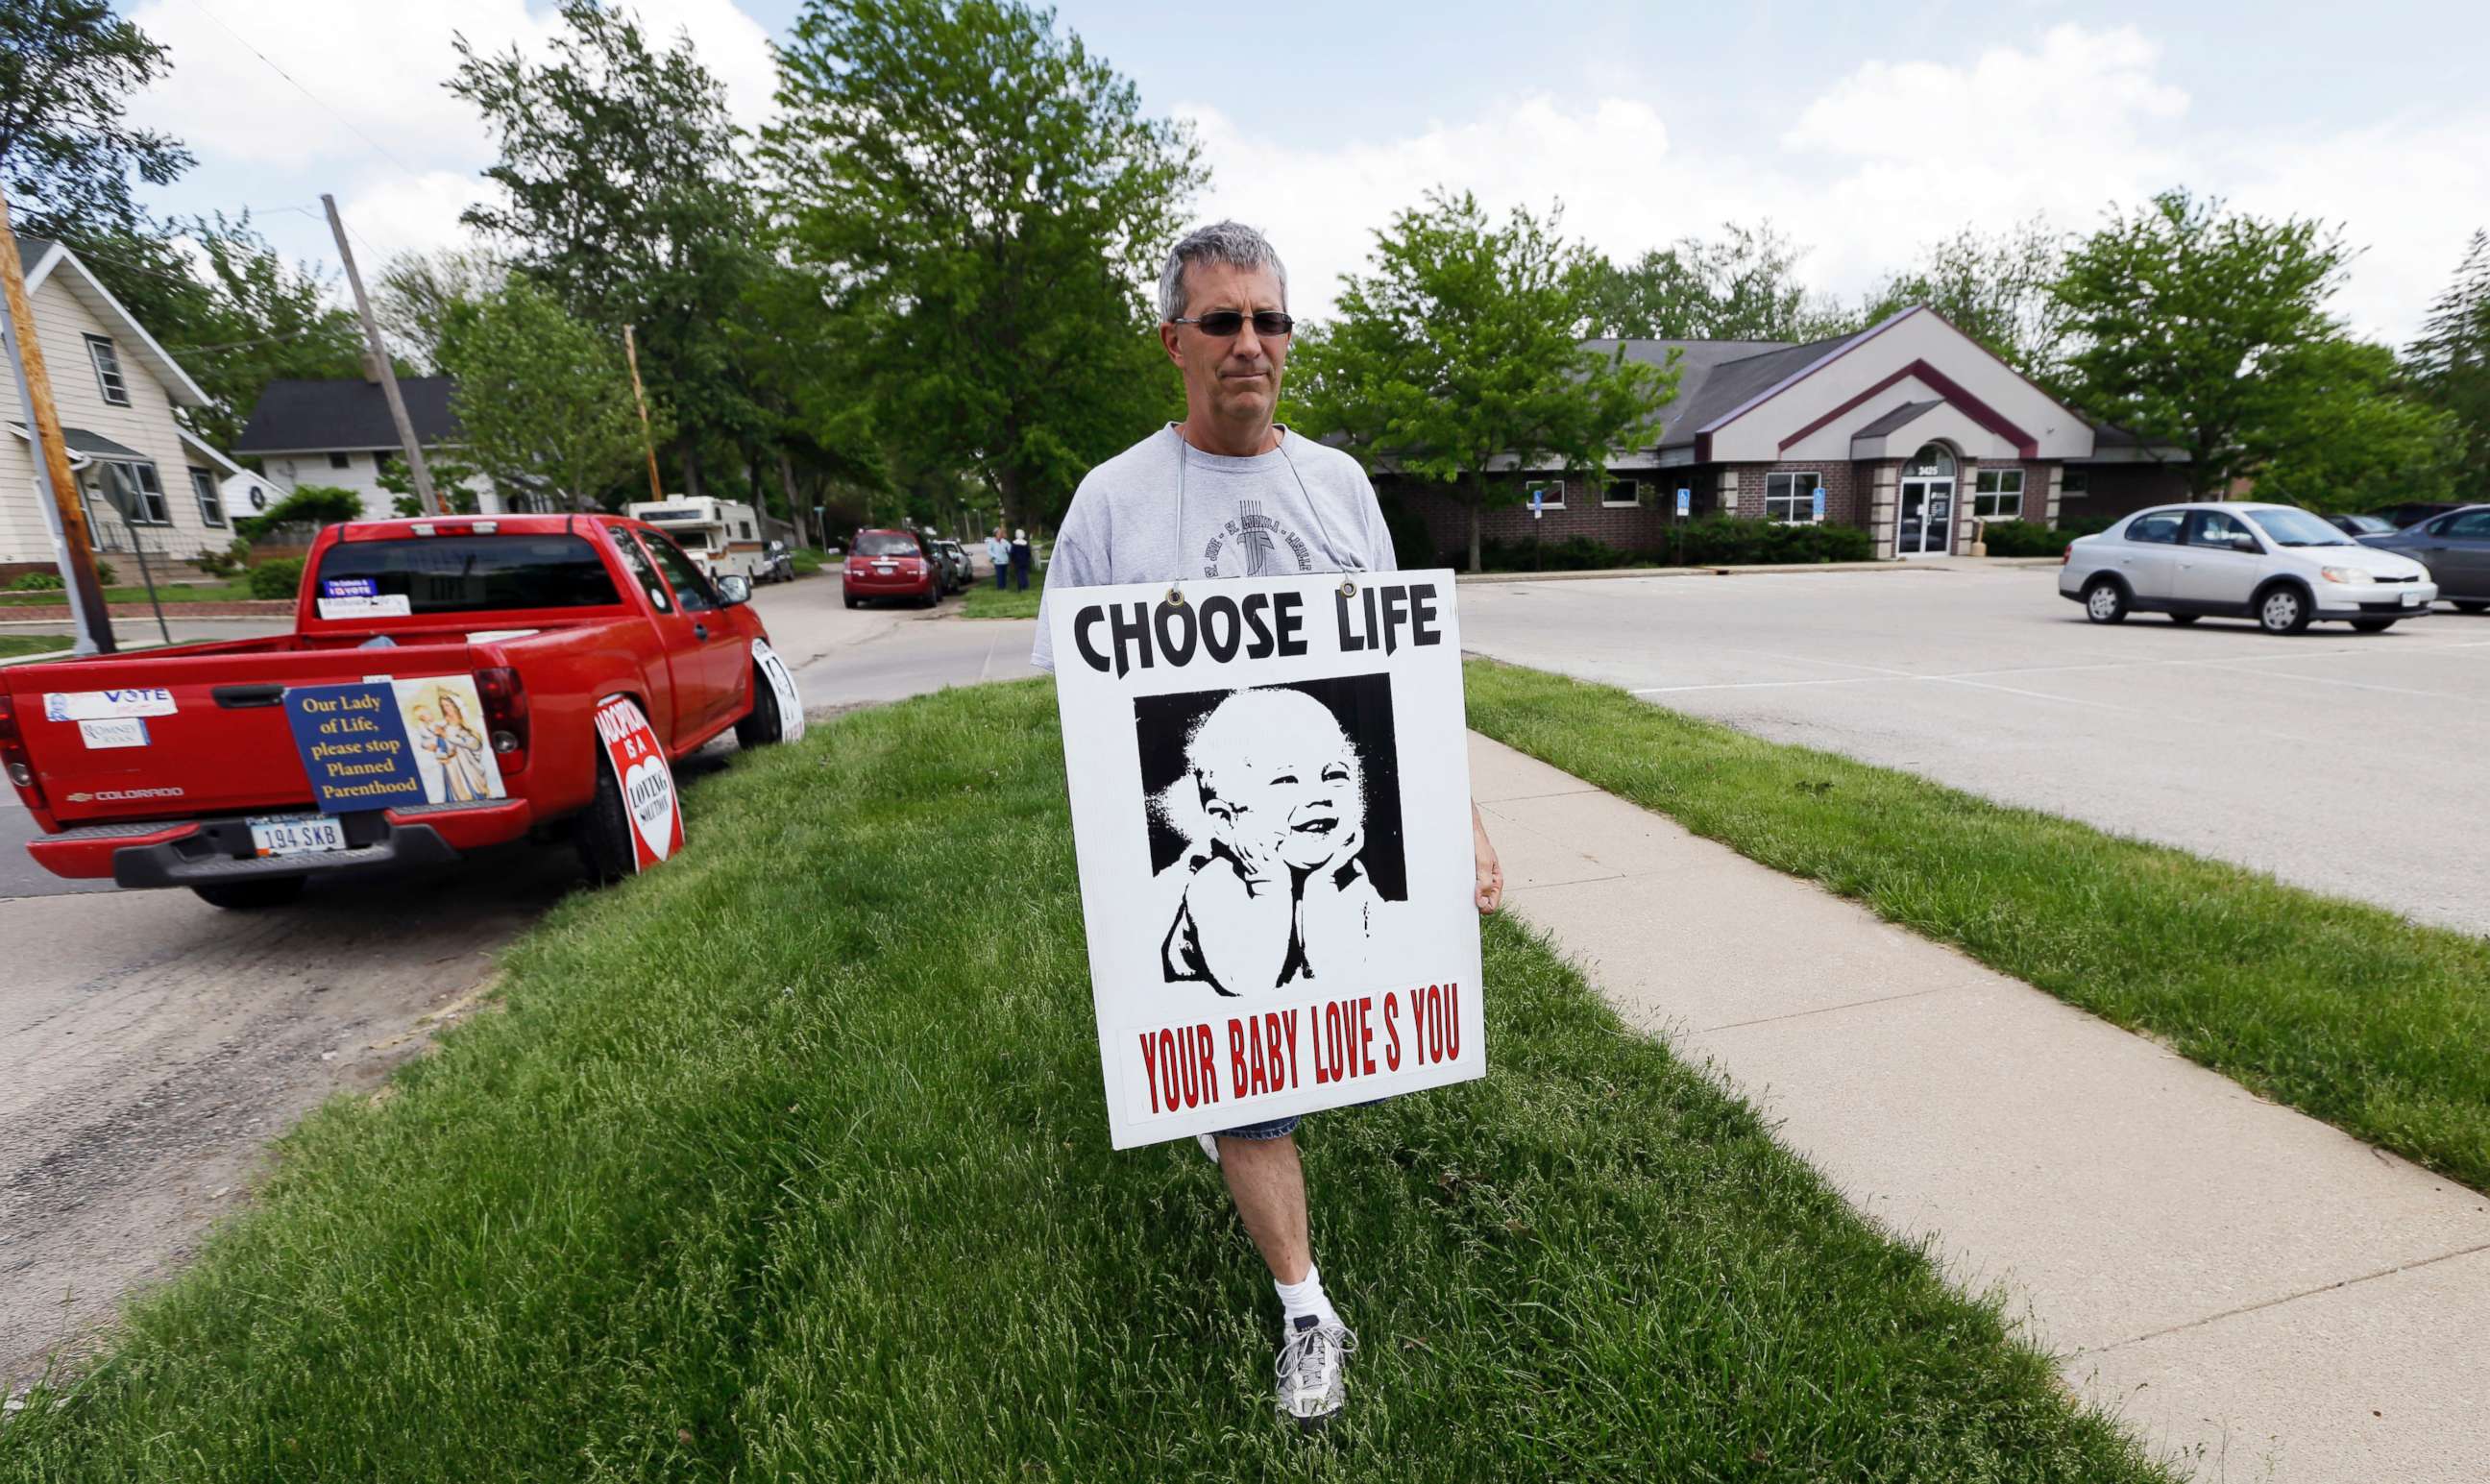 PHOTO: Coalition for Life of Iowa member Ron Digmann walks in front of the Planned Parenthood clinic, May 21, 2013, in Cedar Rapids, Iowa.